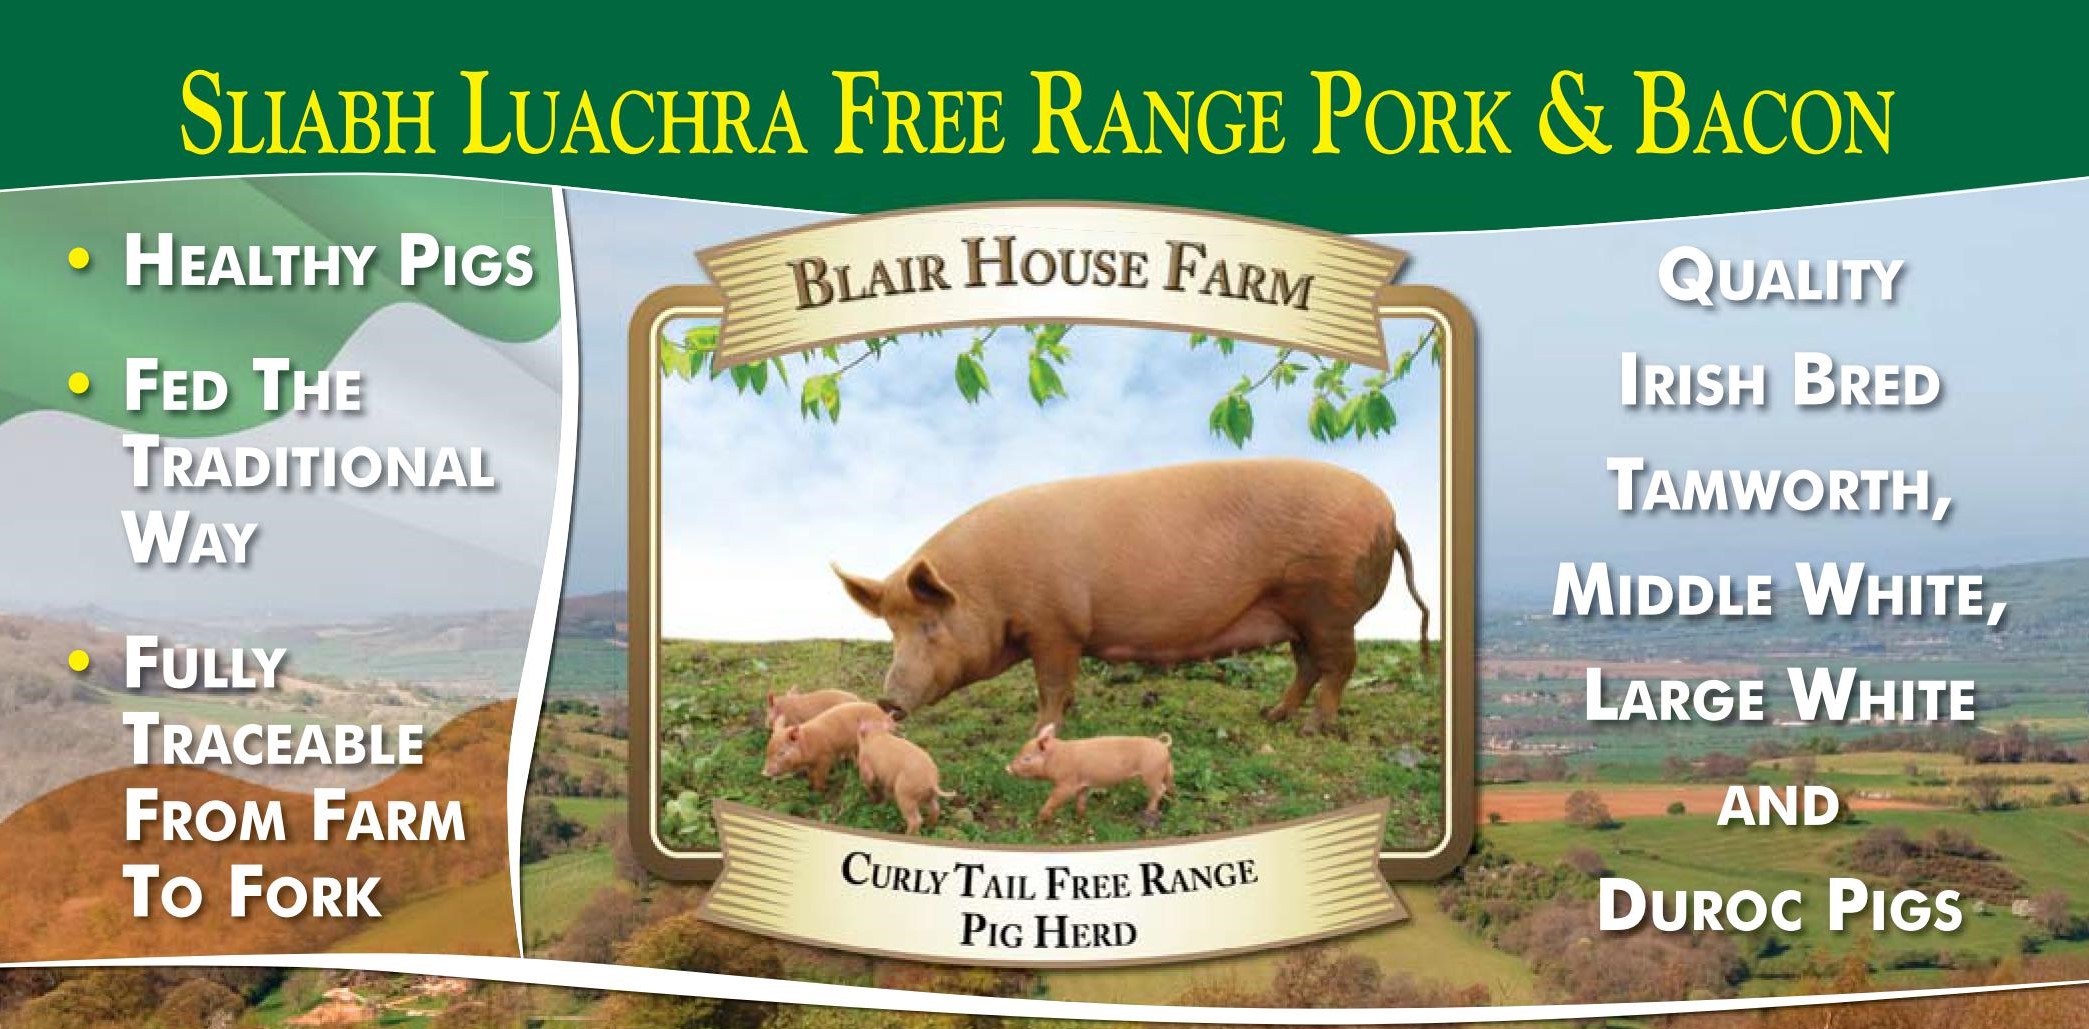 Click to Go to Blair House Farm Shop Page